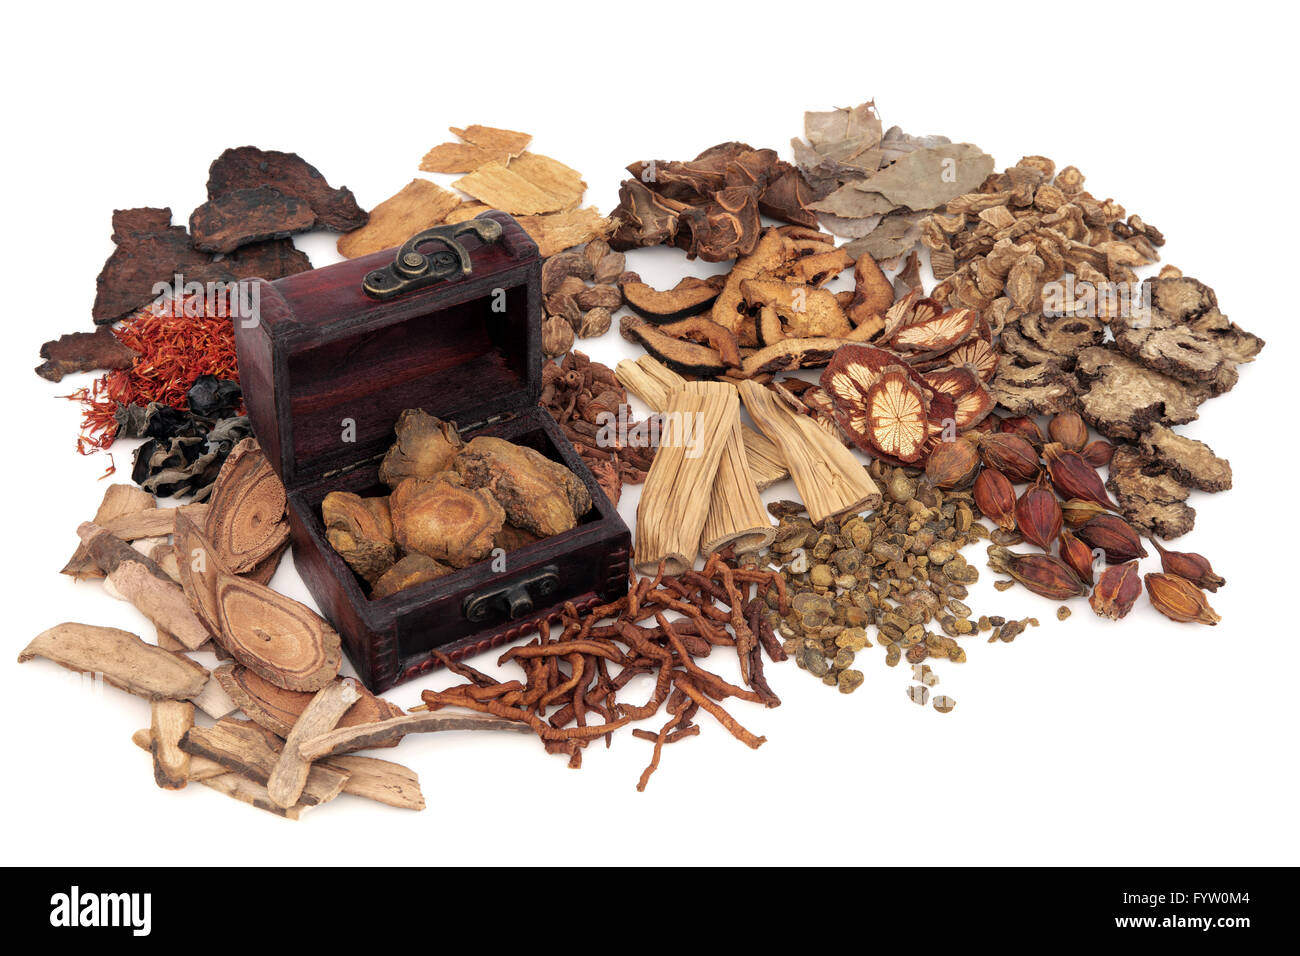 Chinese herb ingredients used in traditional herbal medicine with an old box over white background. Stock Photo